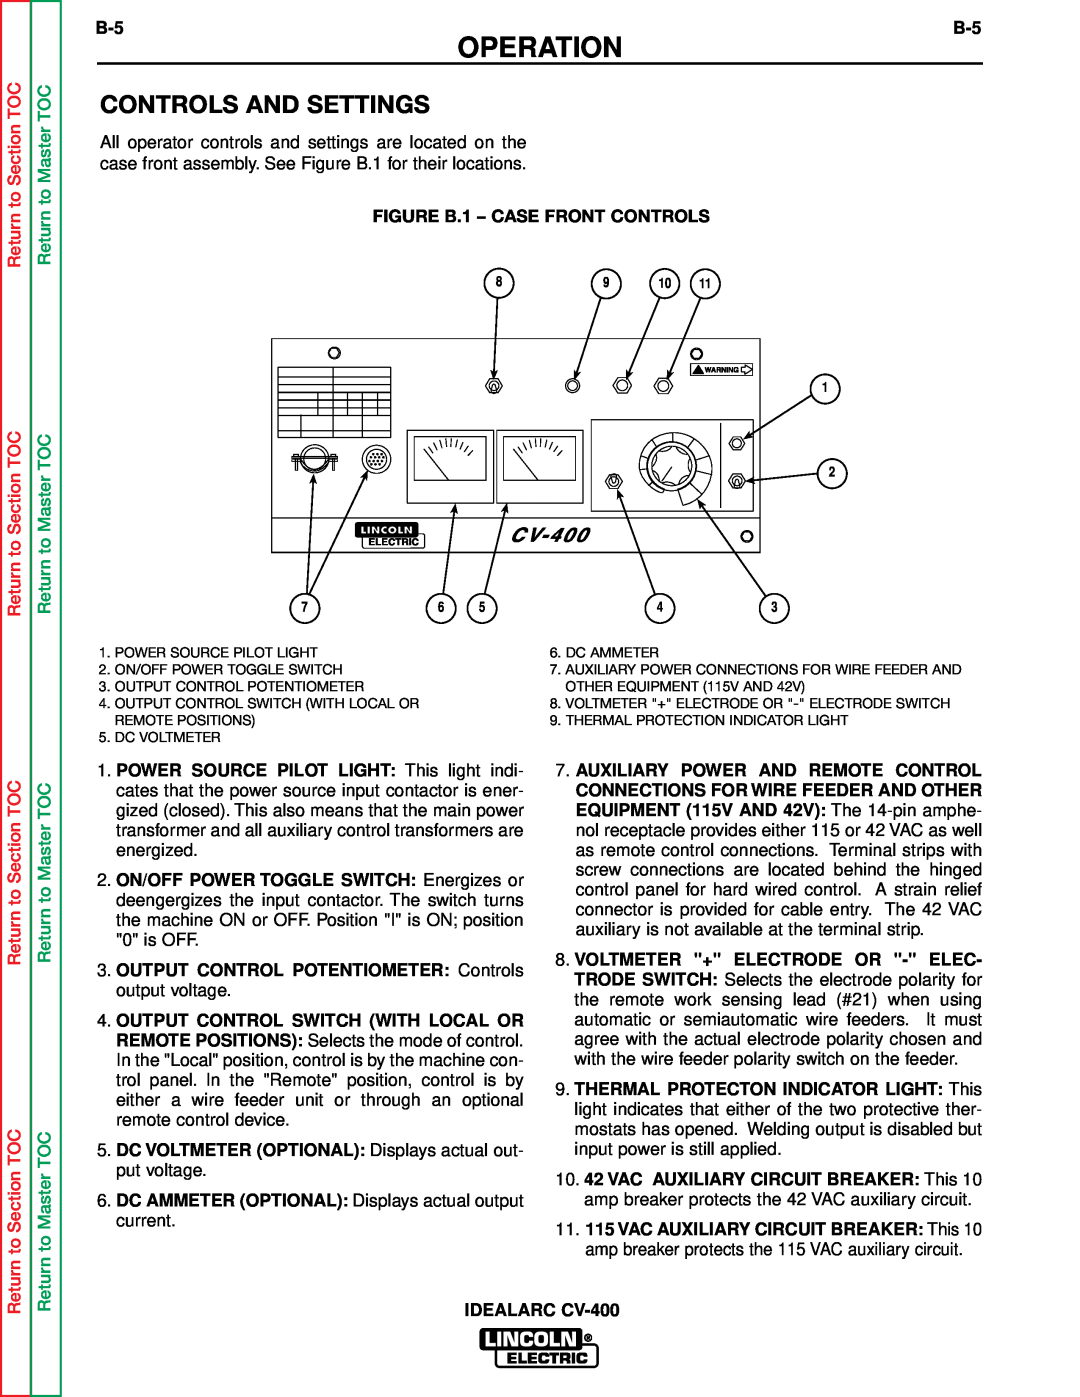 Lincoln Electric SVM136-A service manual Controls And Settings, Operation, Return to Section TOC Return to Section TOC 